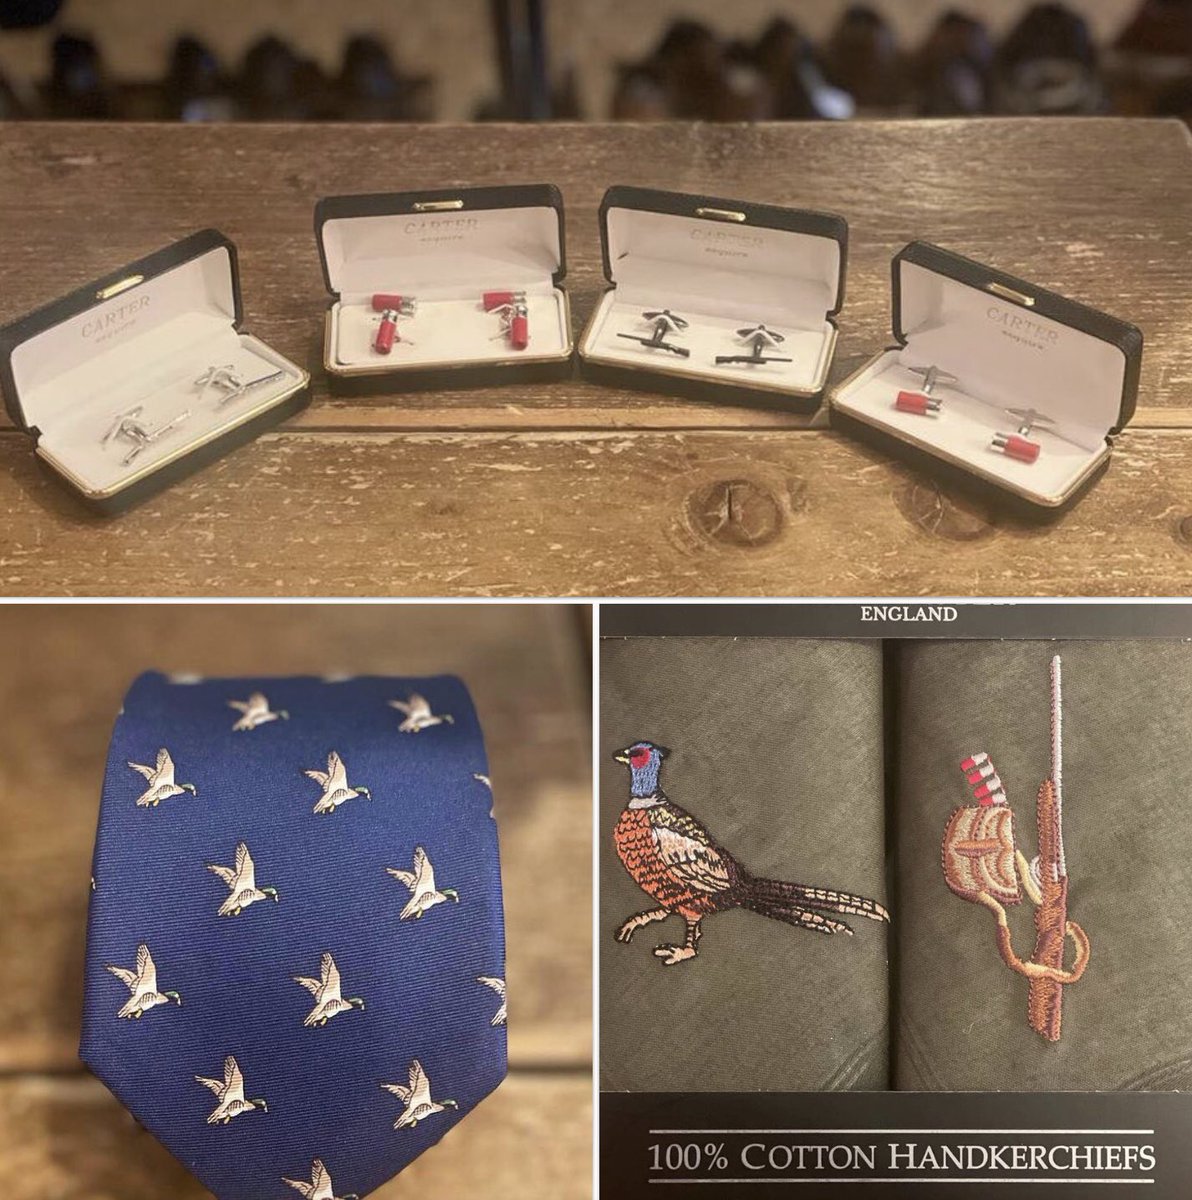 Cufflinks and accessories in a range of country and shooting theme styles for the more formal county attire!

Great gift ideas for Birthdays or Valentine’s Day ❤️.

#countryliving #bromsgrove #giftideasforhim